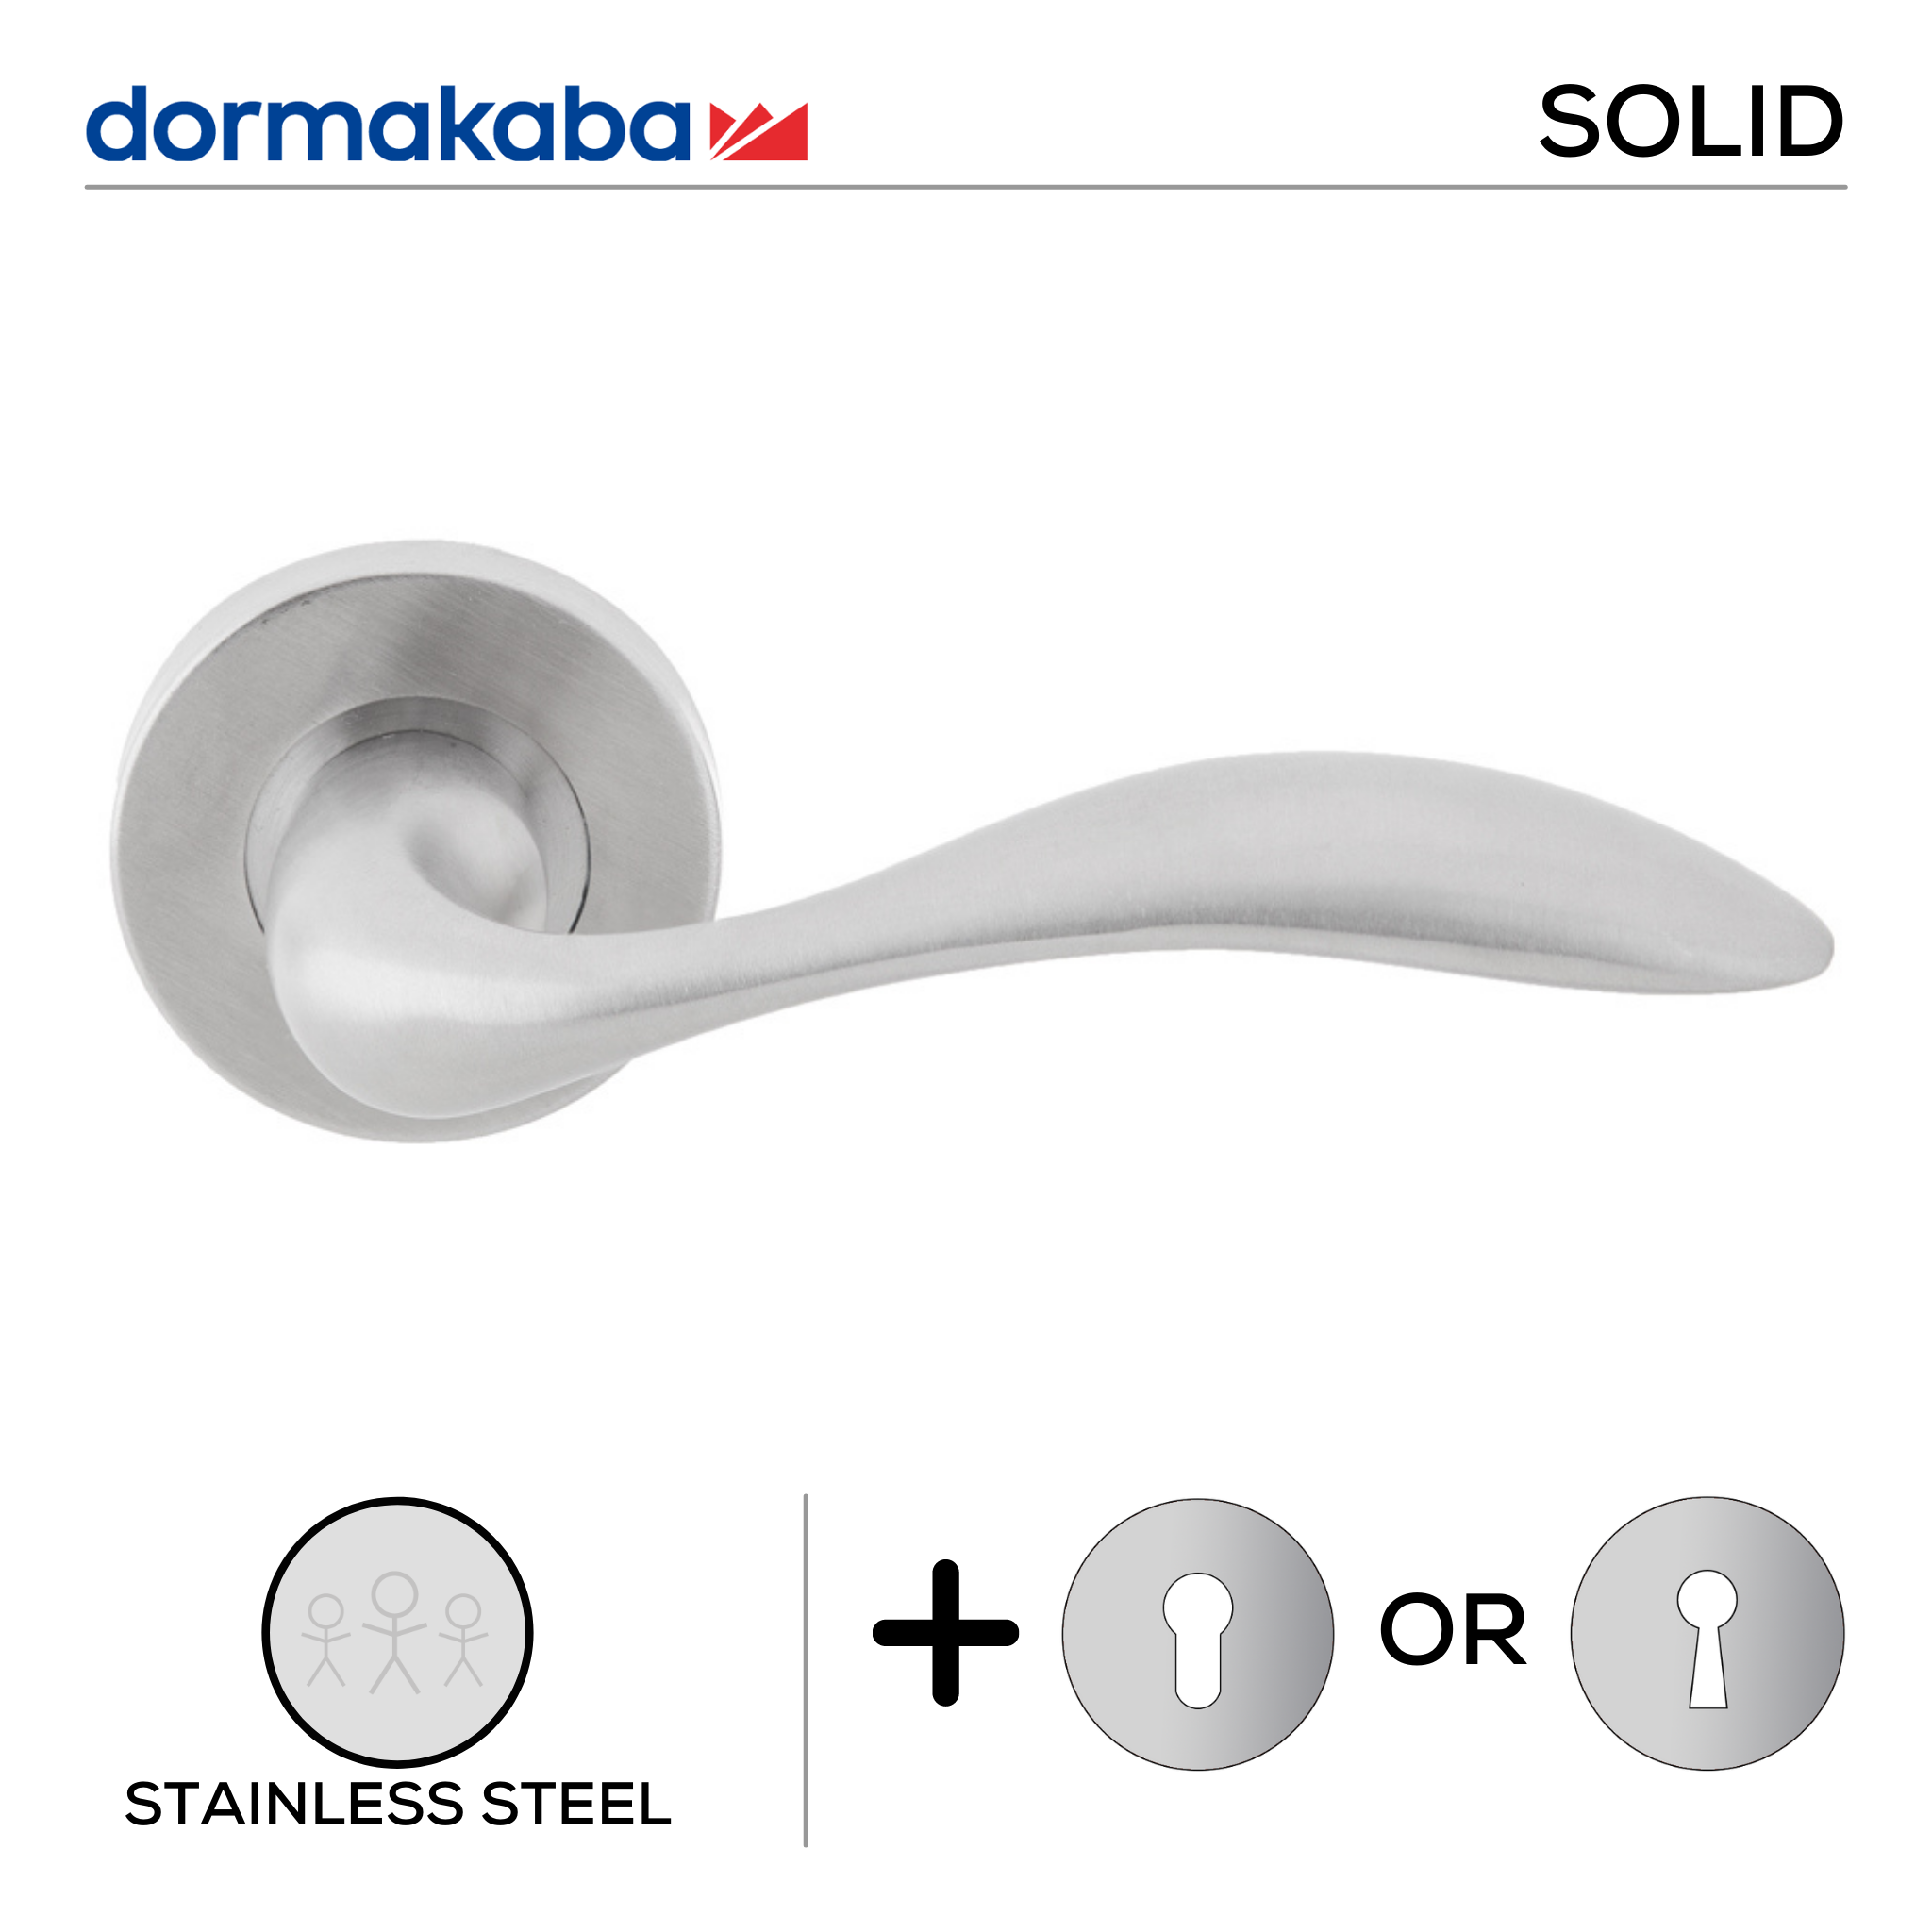 SH 817, Lever Handles, Solid, On Round Rose, With Escutcheons, 145mm (l), Stainless Steel, DORMAKABA